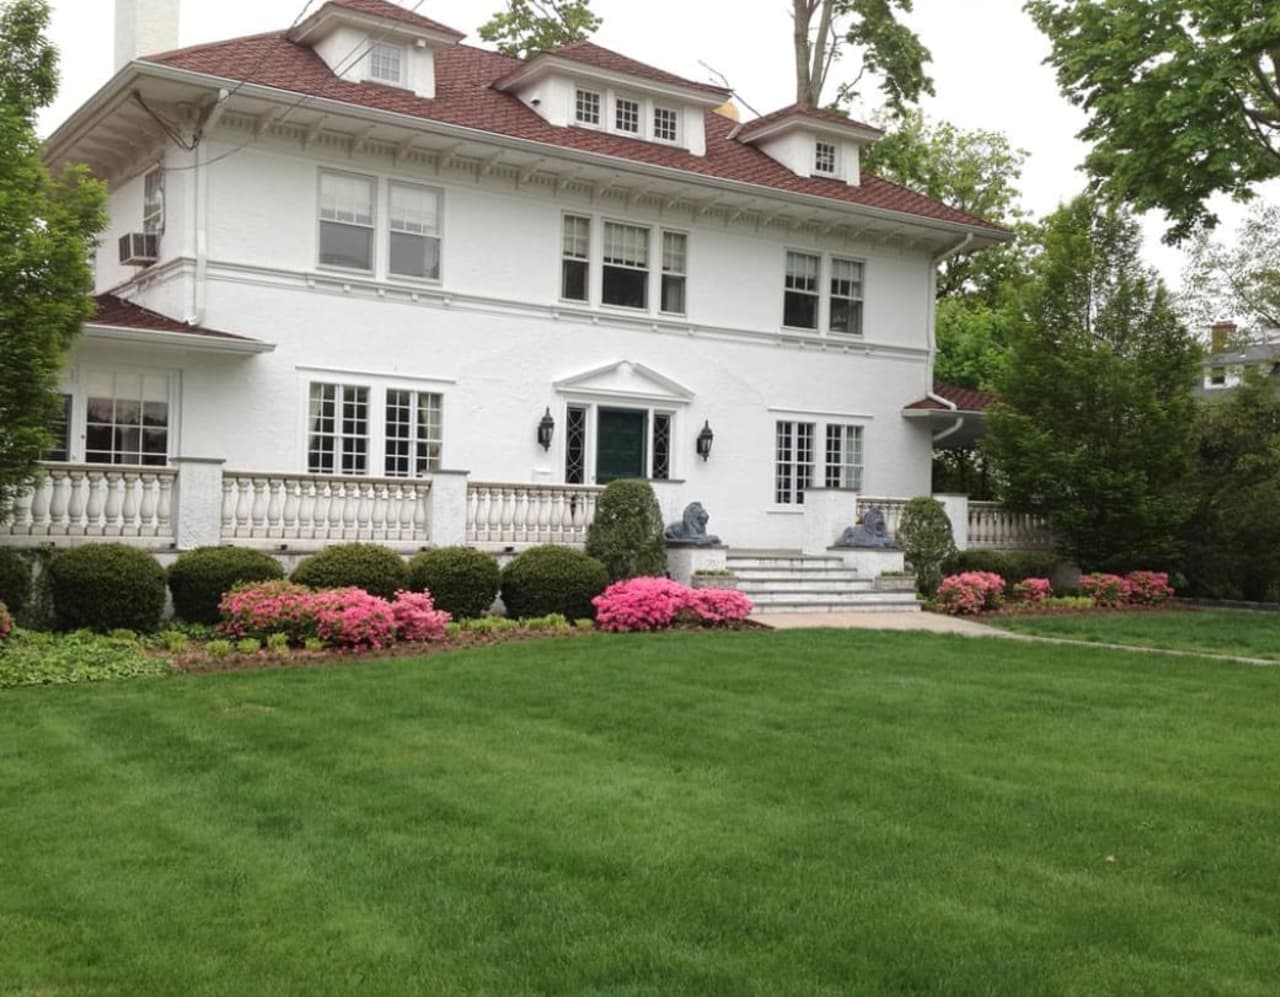 This Bronxville home is selling for more than $2 million.